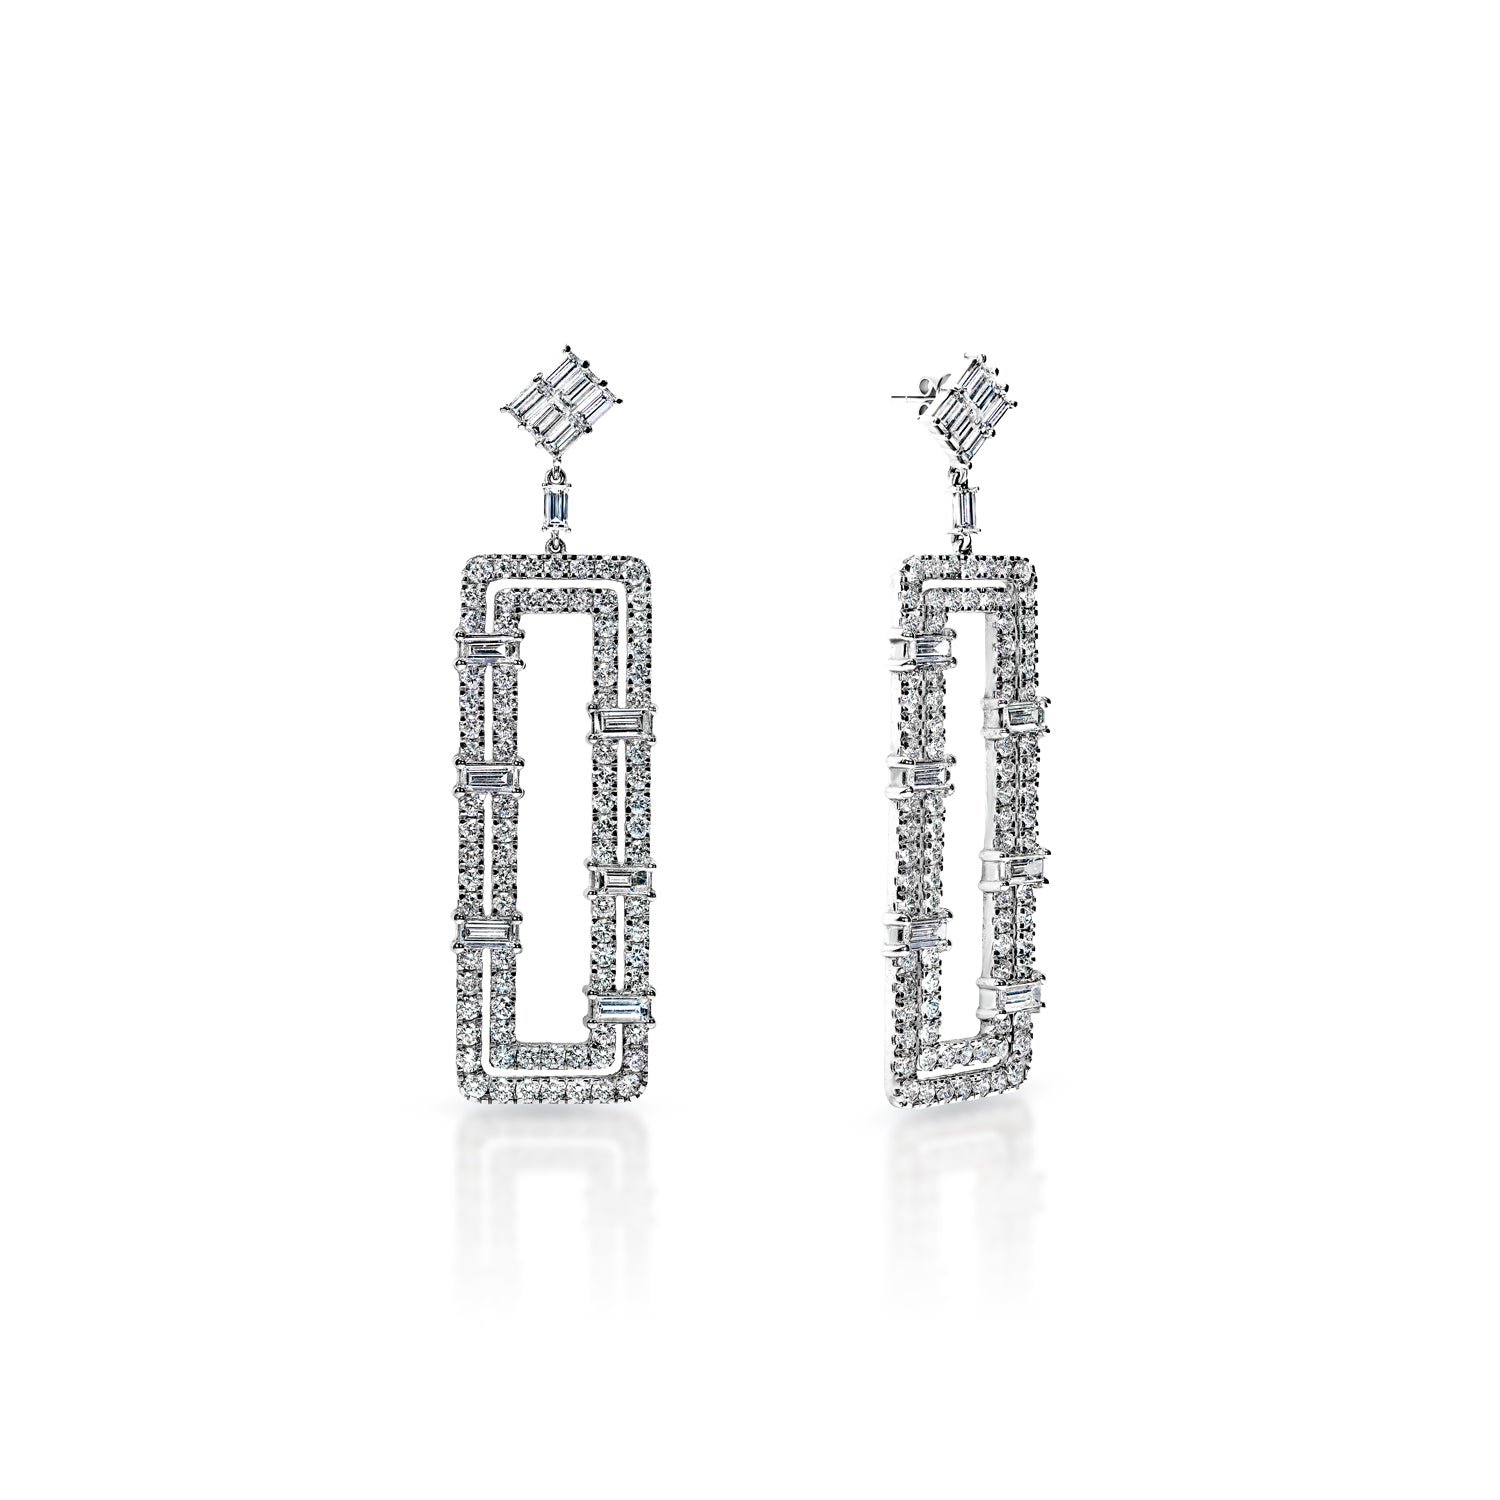 Vida 12 Carats Combine Mixed Shape Hanging Earrings in 14k White Gold Front and Side View